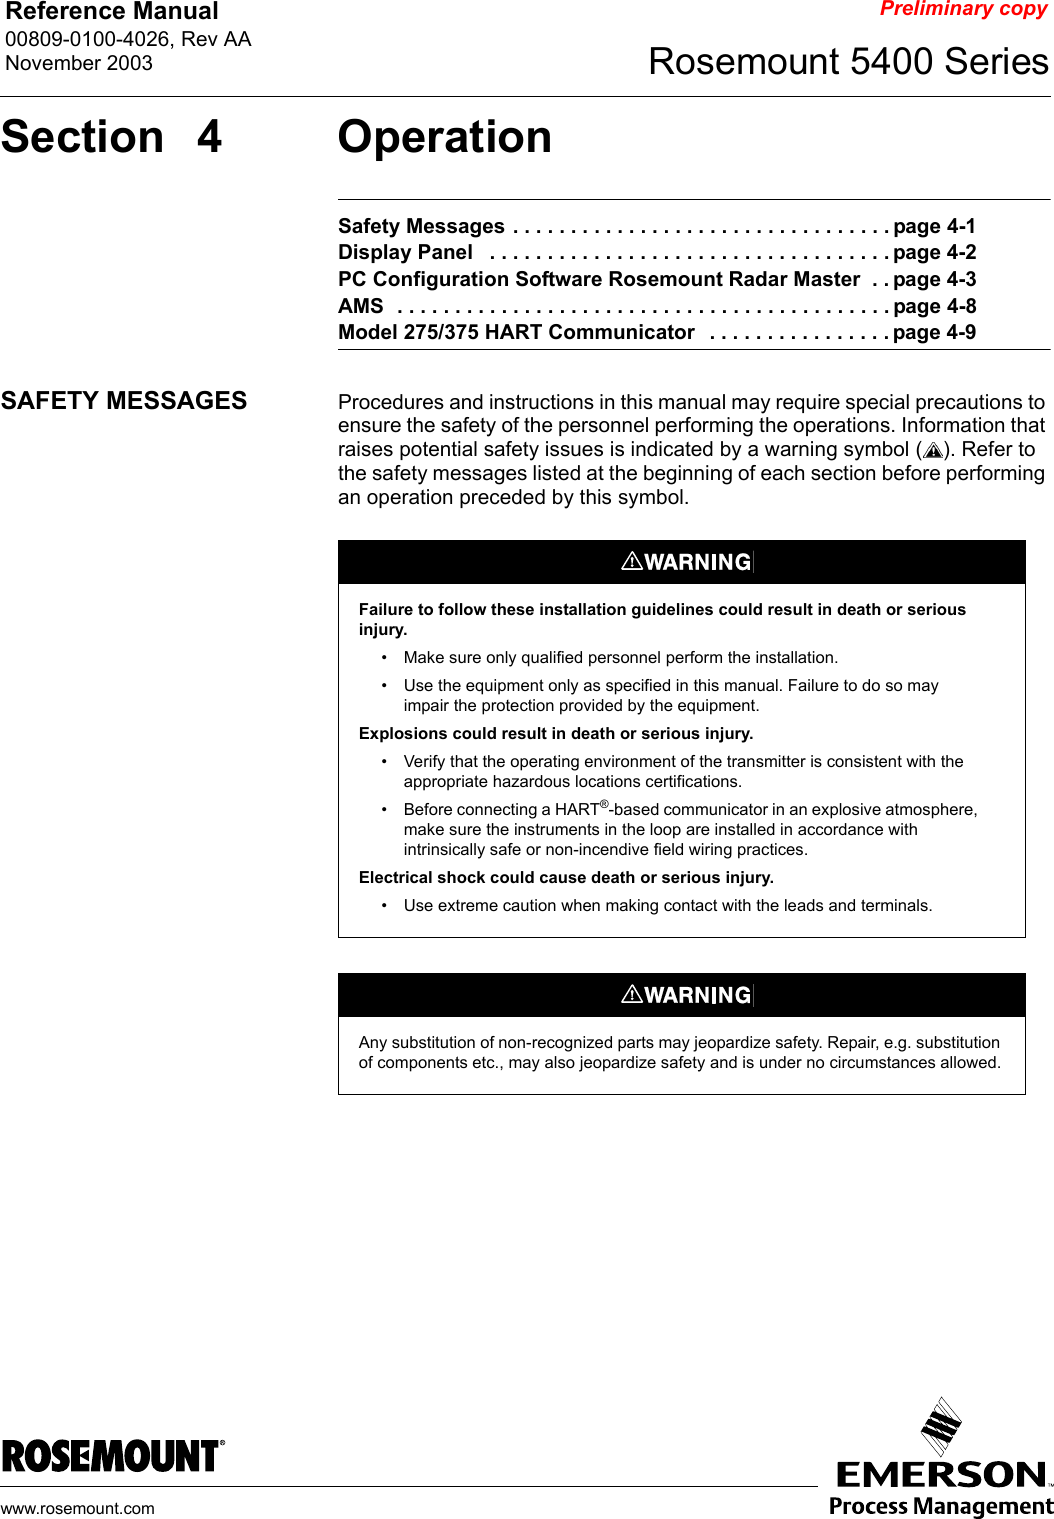 Reference Manual 00809-0100-4026, Rev AANovember 2003 Rosemount 5400 Serieswww.rosemount.comPreliminary copySection 4 OperationSafety Messages . . . . . . . . . . . . . . . . . . . . . . . . . . . . . . . . . page 4-1Display Panel   . . . . . . . . . . . . . . . . . . . . . . . . . . . . . . . . . . . page 4-2PC Configuration Software Rosemount Radar Master  . . page 4-3AMS  . . . . . . . . . . . . . . . . . . . . . . . . . . . . . . . . . . . . . . . . . . . page 4-8Model 275/375 HART Communicator   . . . . . . . . . . . . . . . . page 4-9SAFETY MESSAGES Procedures and instructions in this manual may require special precautions to ensure the safety of the personnel performing the operations. Information that raises potential safety issues is indicated by a warning symbol ( ). Refer to the safety messages listed at the beginning of each section before performing an operation preceded by this symbol.Failure to follow these installation guidelines could result in death or serious injury.• Make sure only qualified personnel perform the installation.• Use the equipment only as specified in this manual. Failure to do so may impair the protection provided by the equipment.Explosions could result in death or serious injury.• Verify that the operating environment of the transmitter is consistent with the appropriate hazardous locations certifications.• Before connecting a HART®-based communicator in an explosive atmosphere, make sure the instruments in the loop are installed in accordance with intrinsically safe or non-incendive field wiring practices.Electrical shock could cause death or serious injury.• Use extreme caution when making contact with the leads and terminals.Any substitution of non-recognized parts may jeopardize safety. Repair, e.g. substitution of components etc., may also jeopardize safety and is under no circumstances allowed.